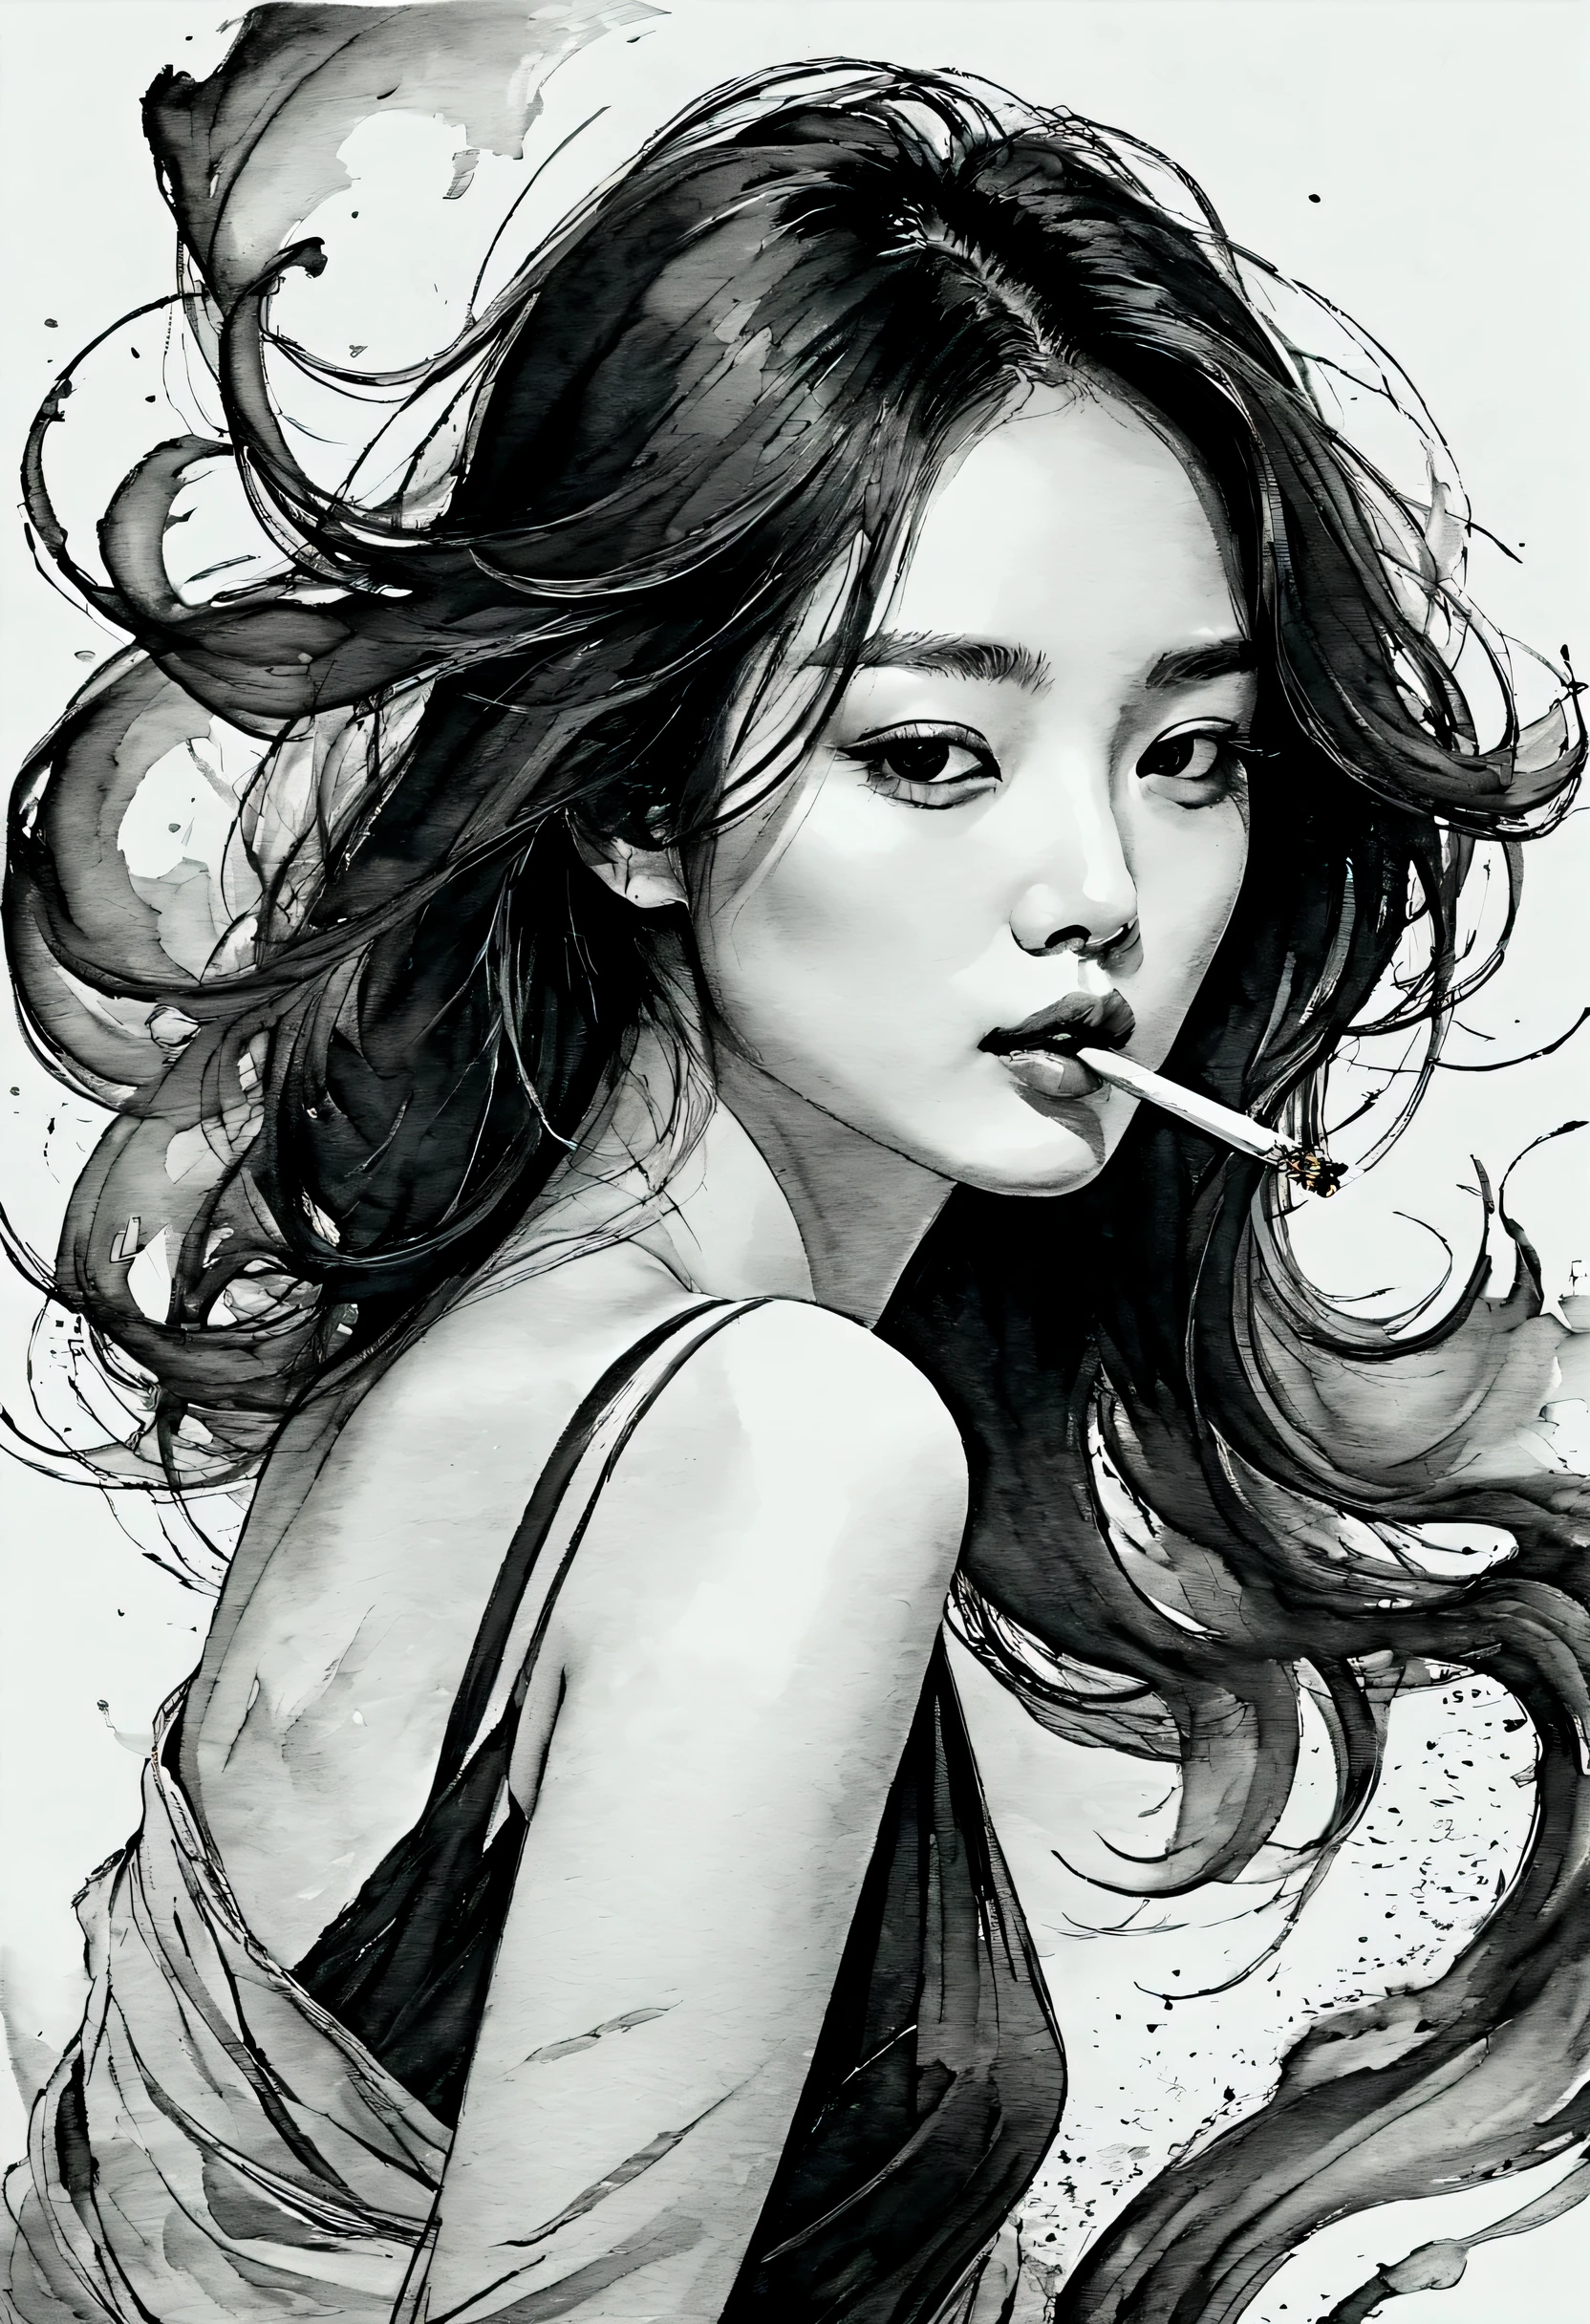 Sexy woman，smokes，black and whiteink画，pen sketch，Loose brushstrokes，Pen outlines delicate lines，Smooth movements，Subtle ink tones，elegant gesture，calm expression，Exquisite facial features，ink，soil，Wet。black and white，Clean